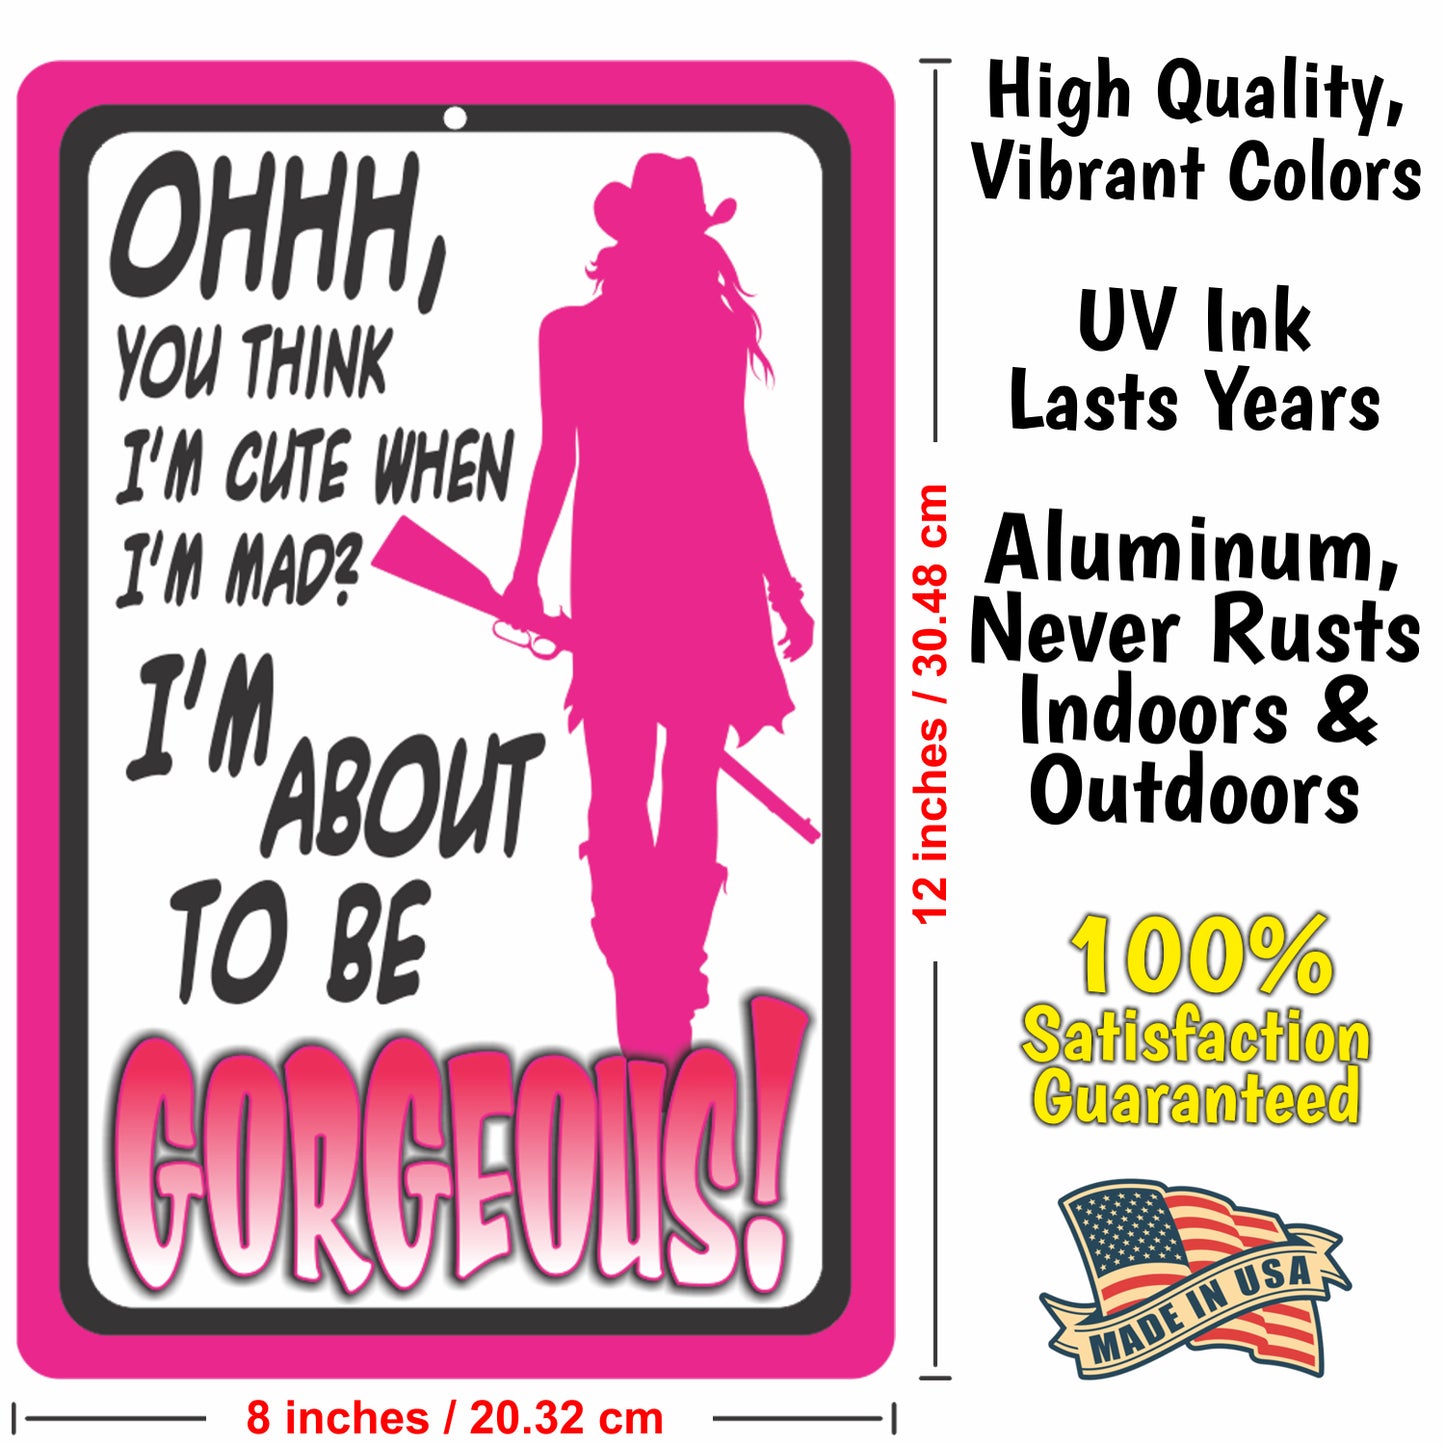 Funny Metal Warning Sign for Bars - Ohhh, You Think I'm Cute When I'm mad? I'm About to be Gorgeous! (Pink) - Size 8 x 12